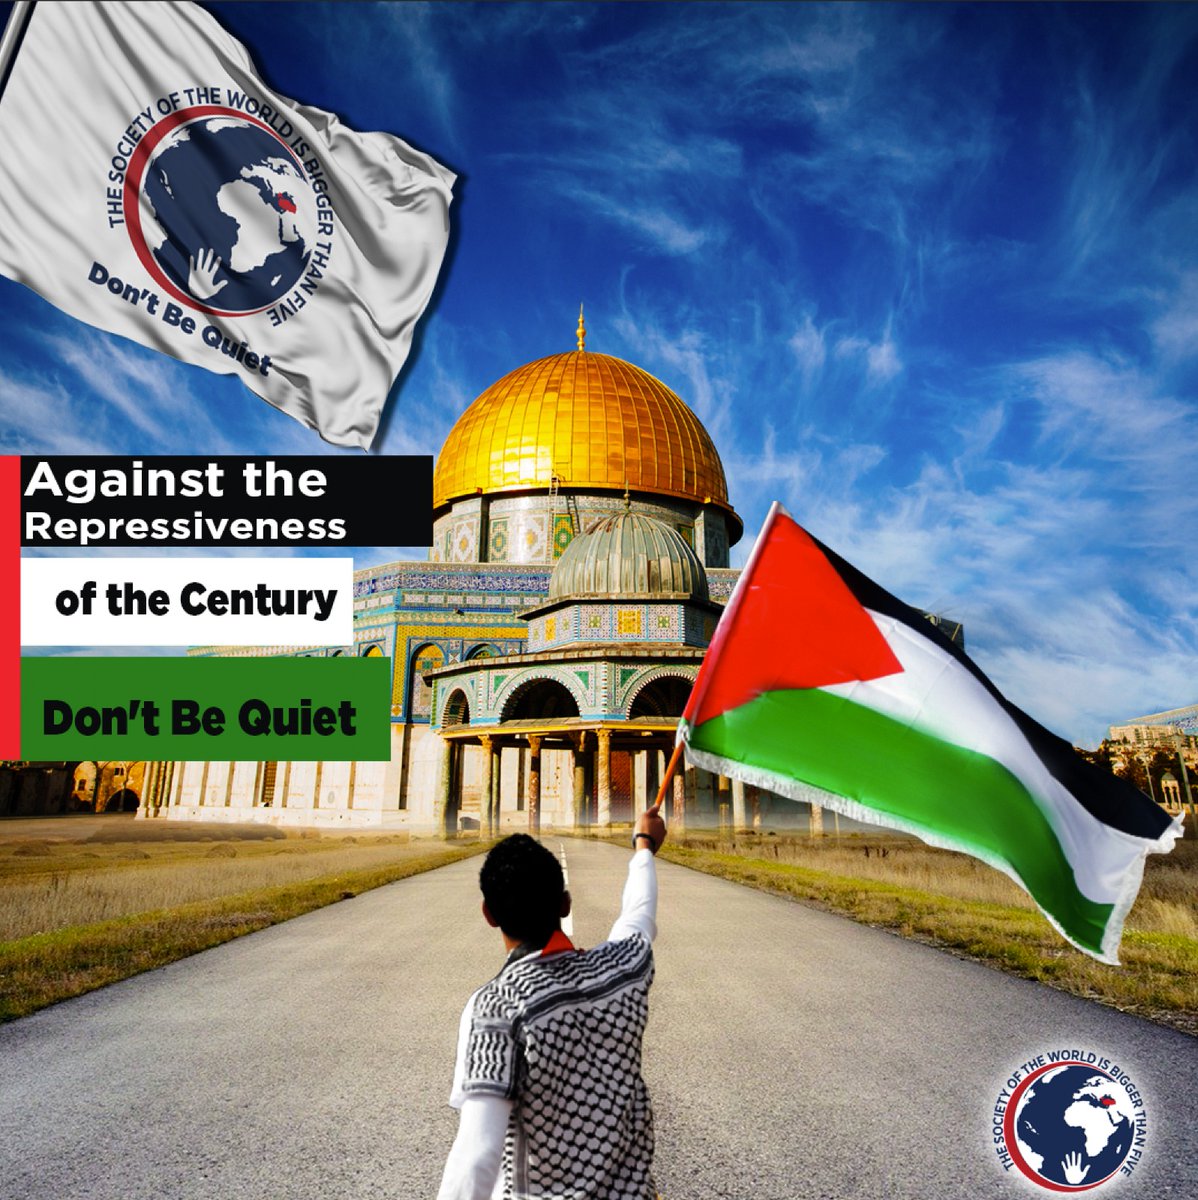 'Today the key of the world peace is Al-Quds as being for thousands of years. If the peace plane falls down in Jerusalem, whole world stays under this.'

Recep Tayyip Erdoğan
President of the Republic of Turkey
#TheWorldisBiggerthanFive
#Evenifeverybodyquietwenever
#DontBeQuiet